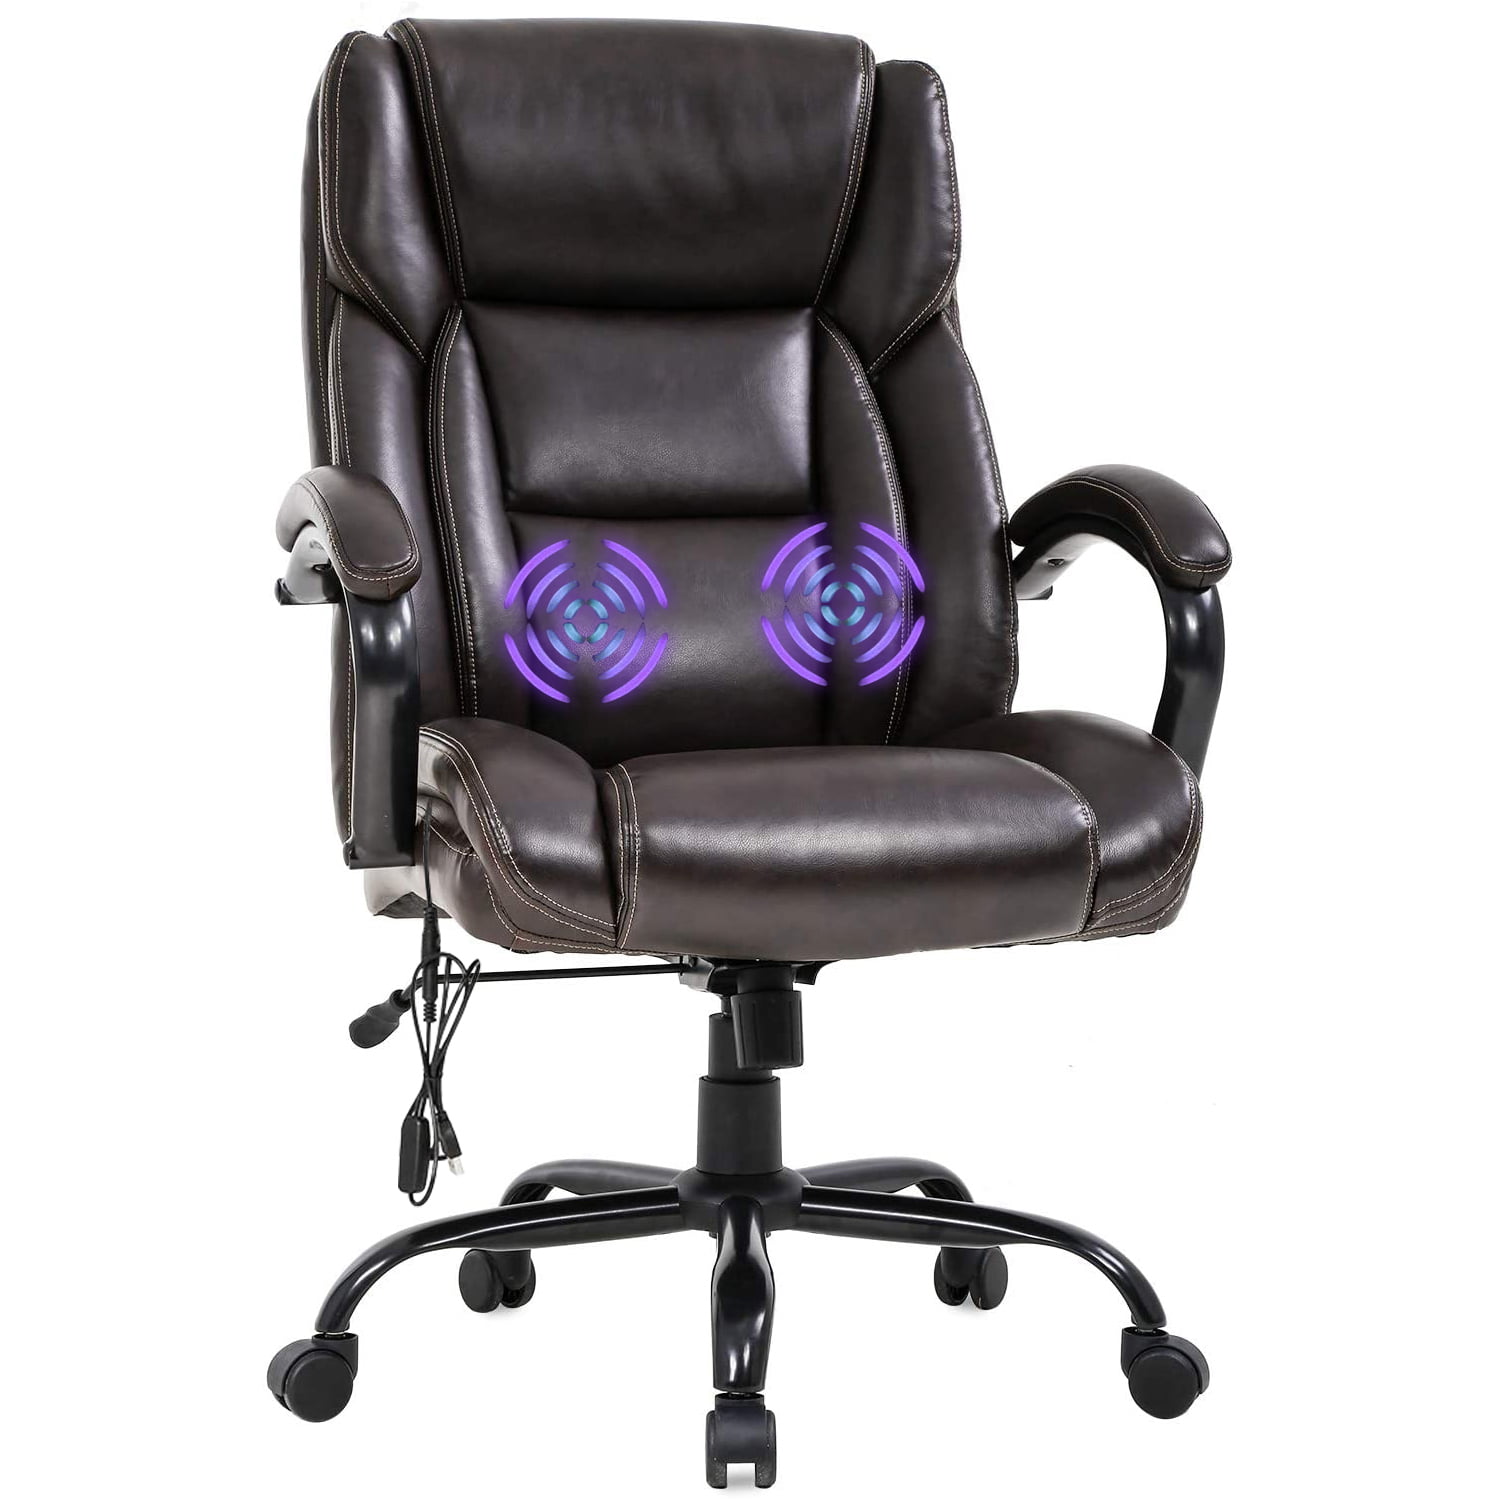 Adjustable PC Gaming Office Chair Wide Seat 400 lb USB Massage cushion 